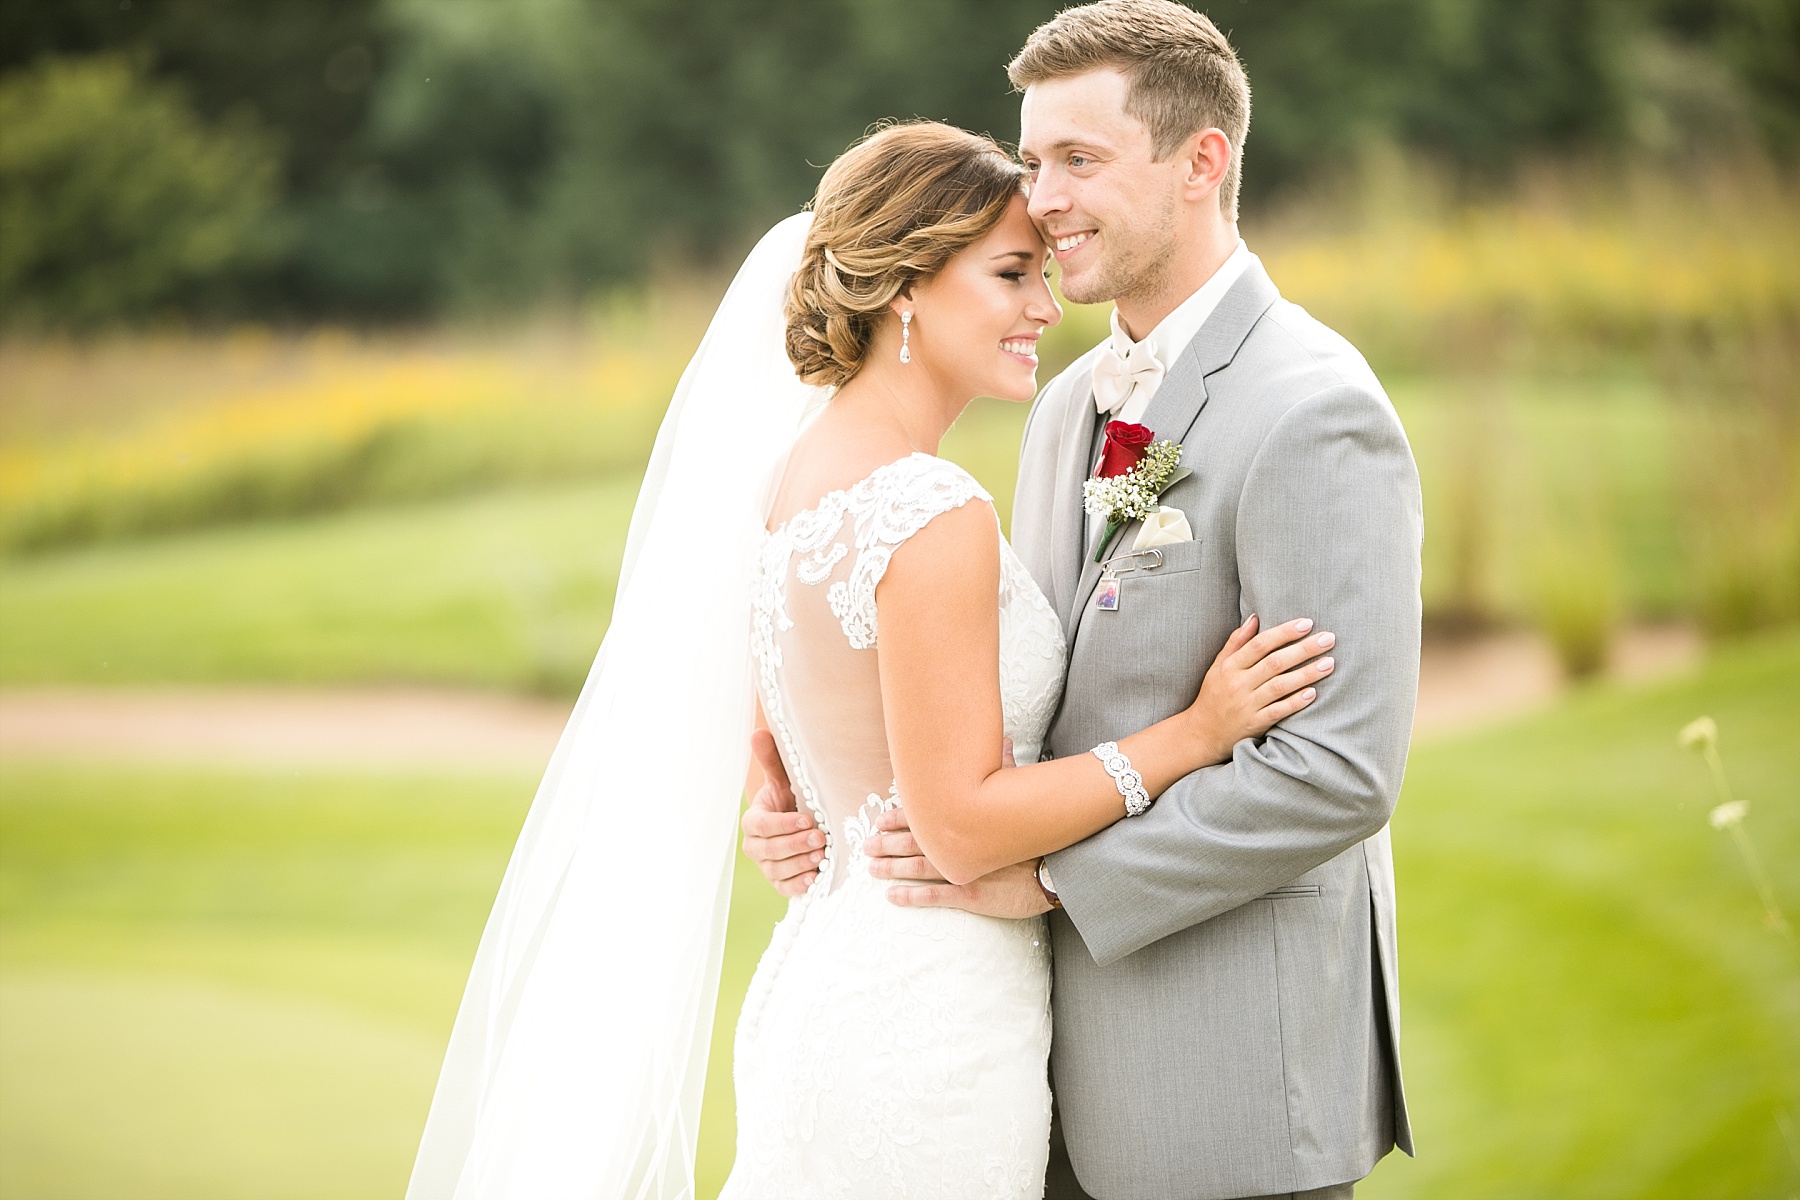 They radiated joy and love for one another as the storm rolled in over their ceremony for an elegant Wild Ridge Golf wedding.